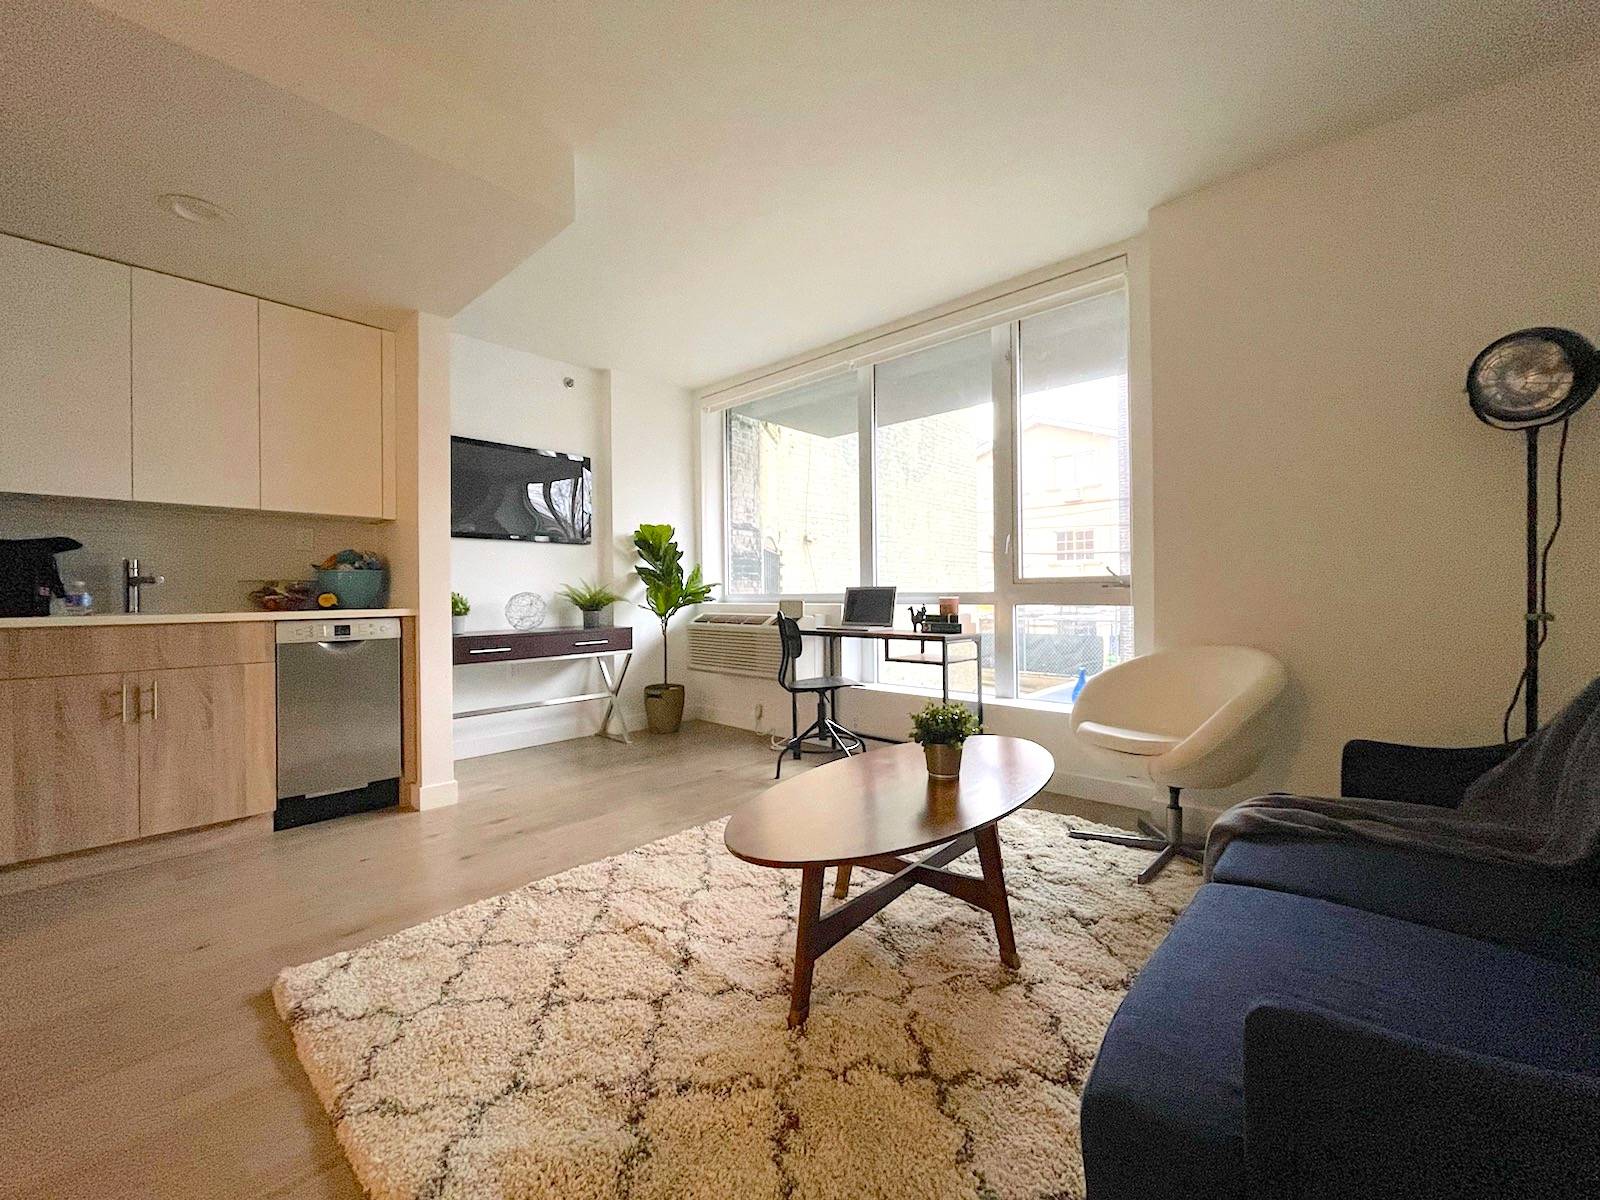 Sign a contract by April 30th and receive 6 months of common charges free Surround yourself in all new everything in this beautifully designed one bedroom, one bathroom condominium in ...